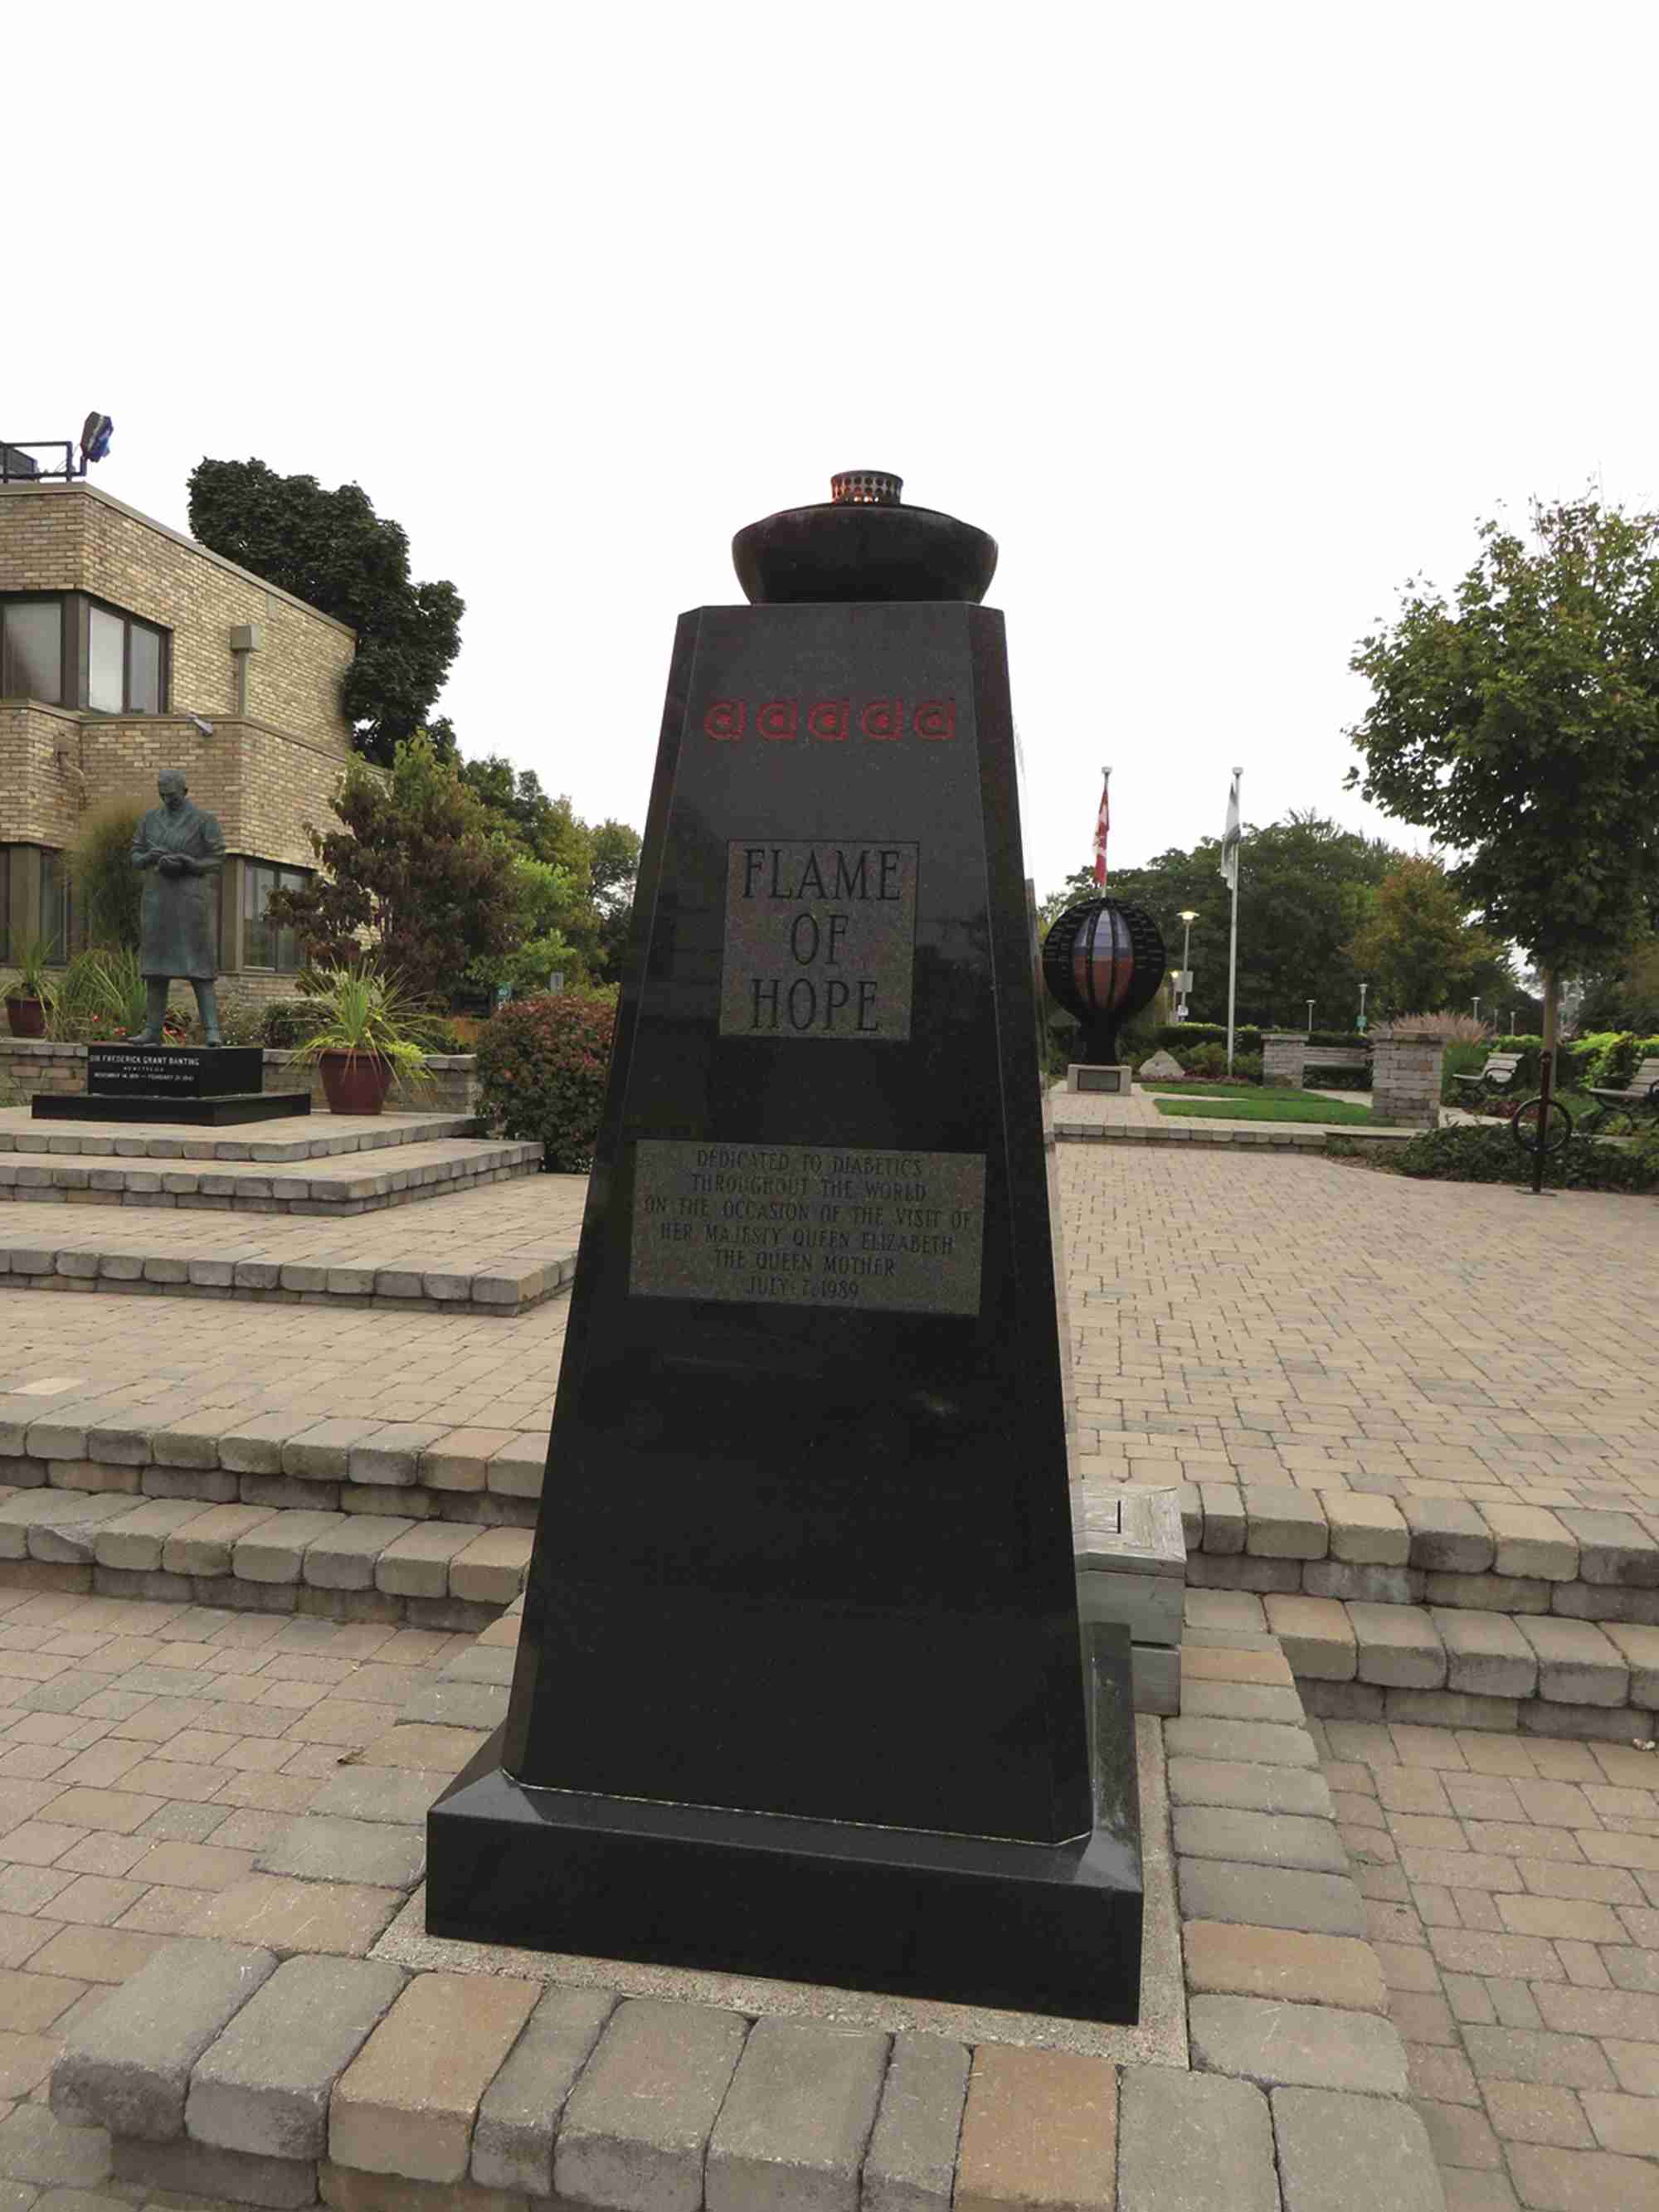 The ‘perpetual flame’ will burn outside Banting House until there is a cure for type 1 diabetes. Ken Lund. https://www.ﬂickr.com/photos/kenlund/21838632935